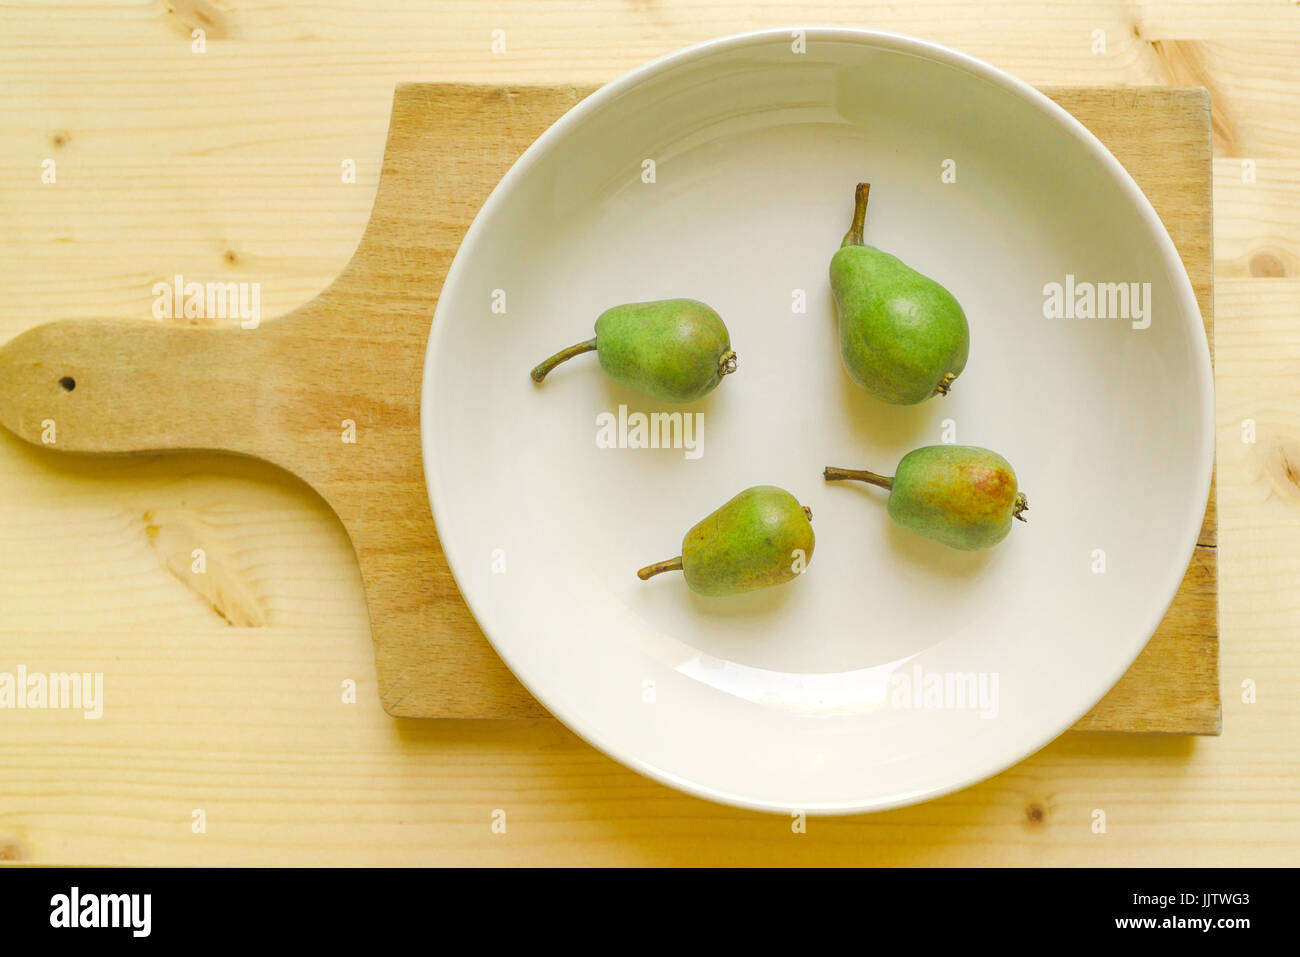 Pears on plate, green fruit on the table Stock Photo